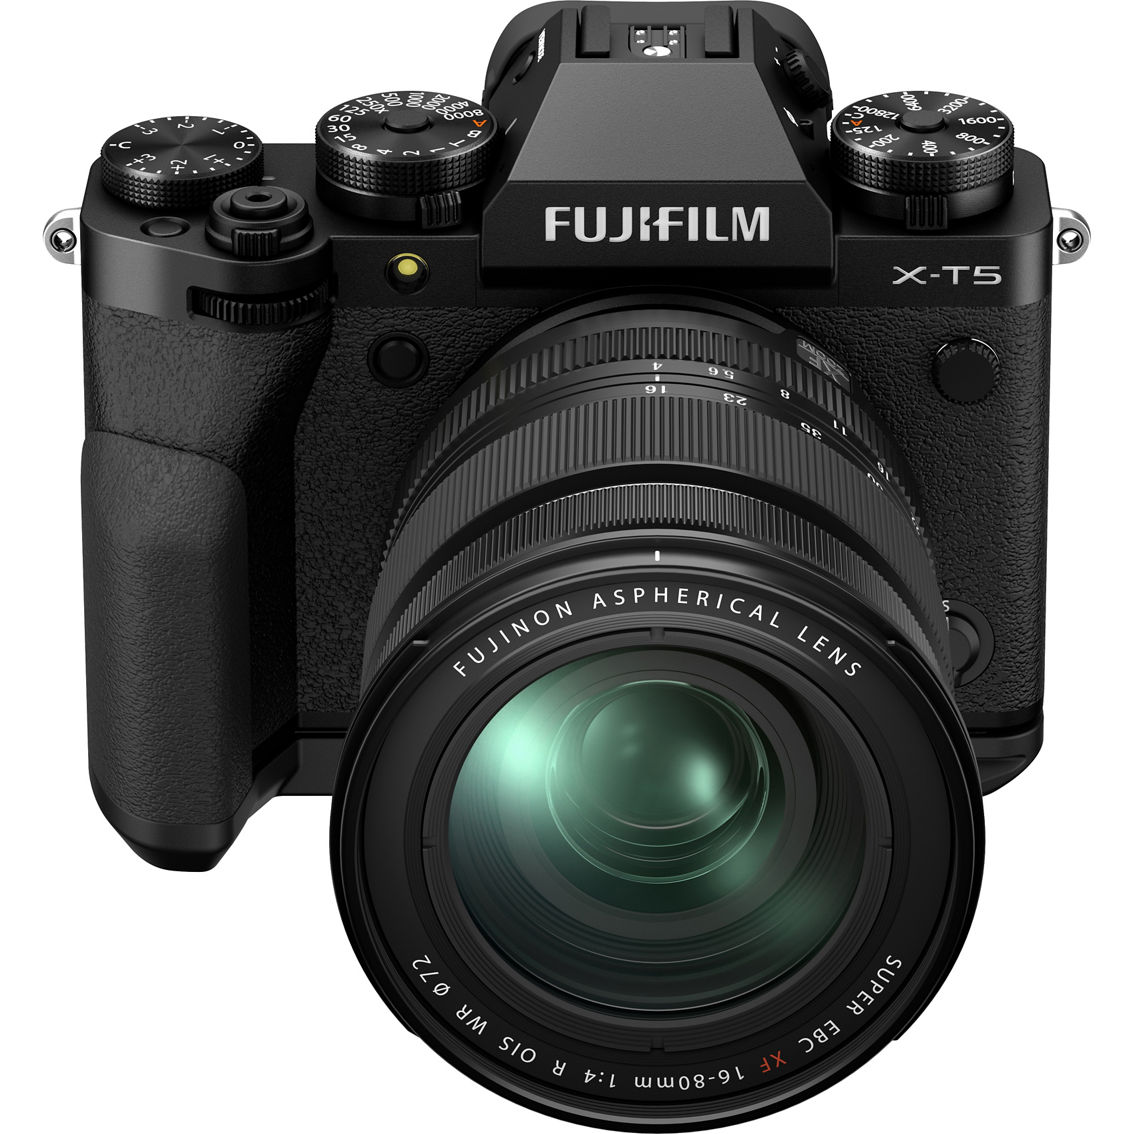 FujiFilm X-T5 Mirrorless Camera Body with XF16-80mmF4 R OIS WR Lens Kit - Image 5 of 10